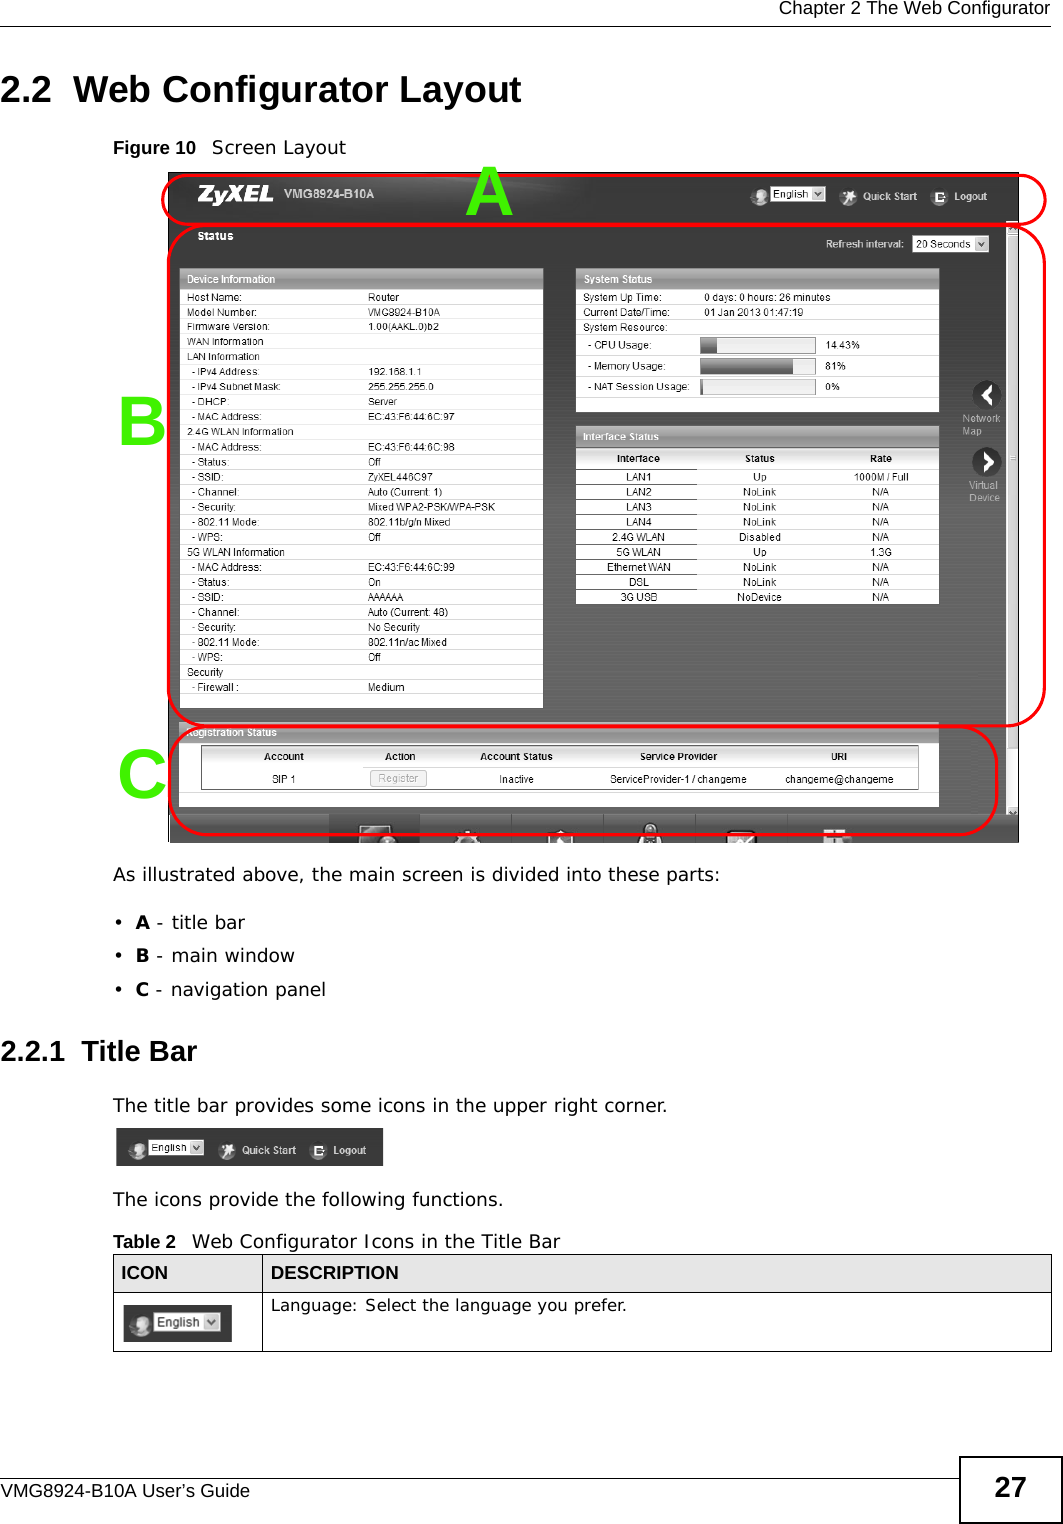  Chapter 2 The Web ConfiguratorVMG8924-B10A User’s Guide 272.2  Web Configurator LayoutFigure 10   Screen LayoutAs illustrated above, the main screen is divided into these parts:•A - title bar•B - main window •C - navigation panel2.2.1  Title BarThe title bar provides some icons in the upper right corner.The icons provide the following functions.BCATable 2   Web Configurator Icons in the Title BarICON  DESCRIPTIONLanguage: Select the language you prefer.